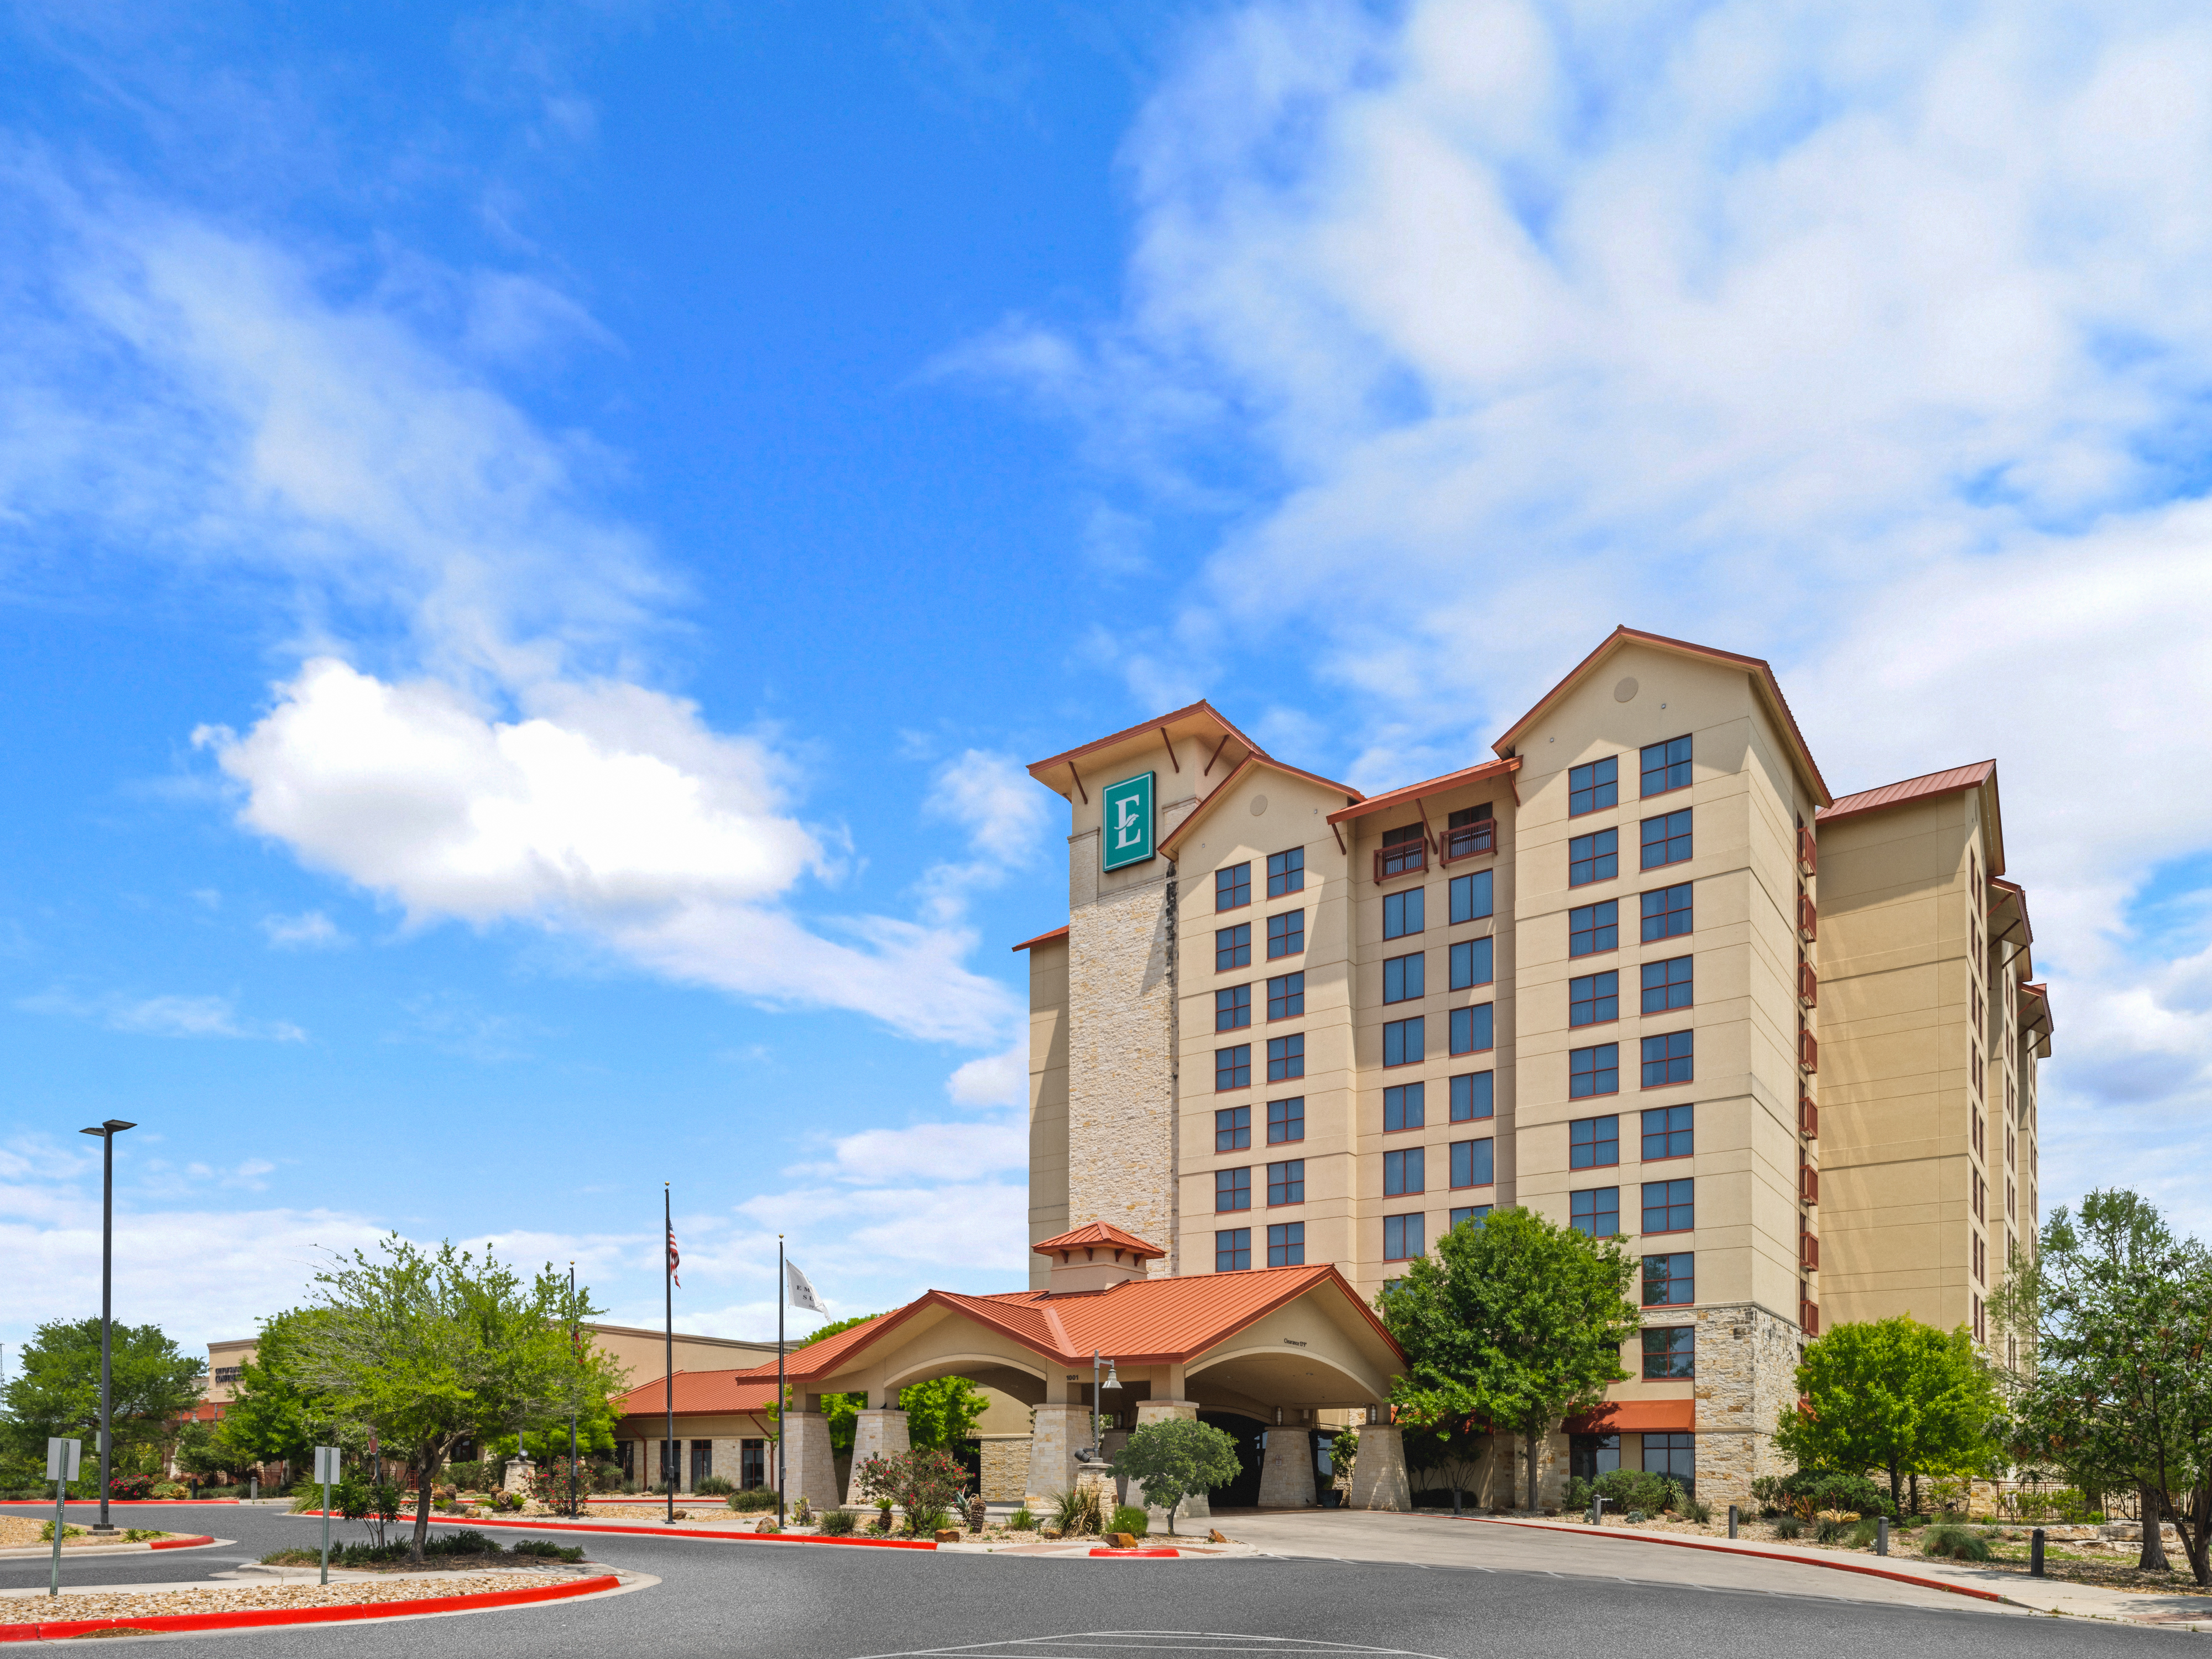 View of Embassy Suites Hotel Exterior